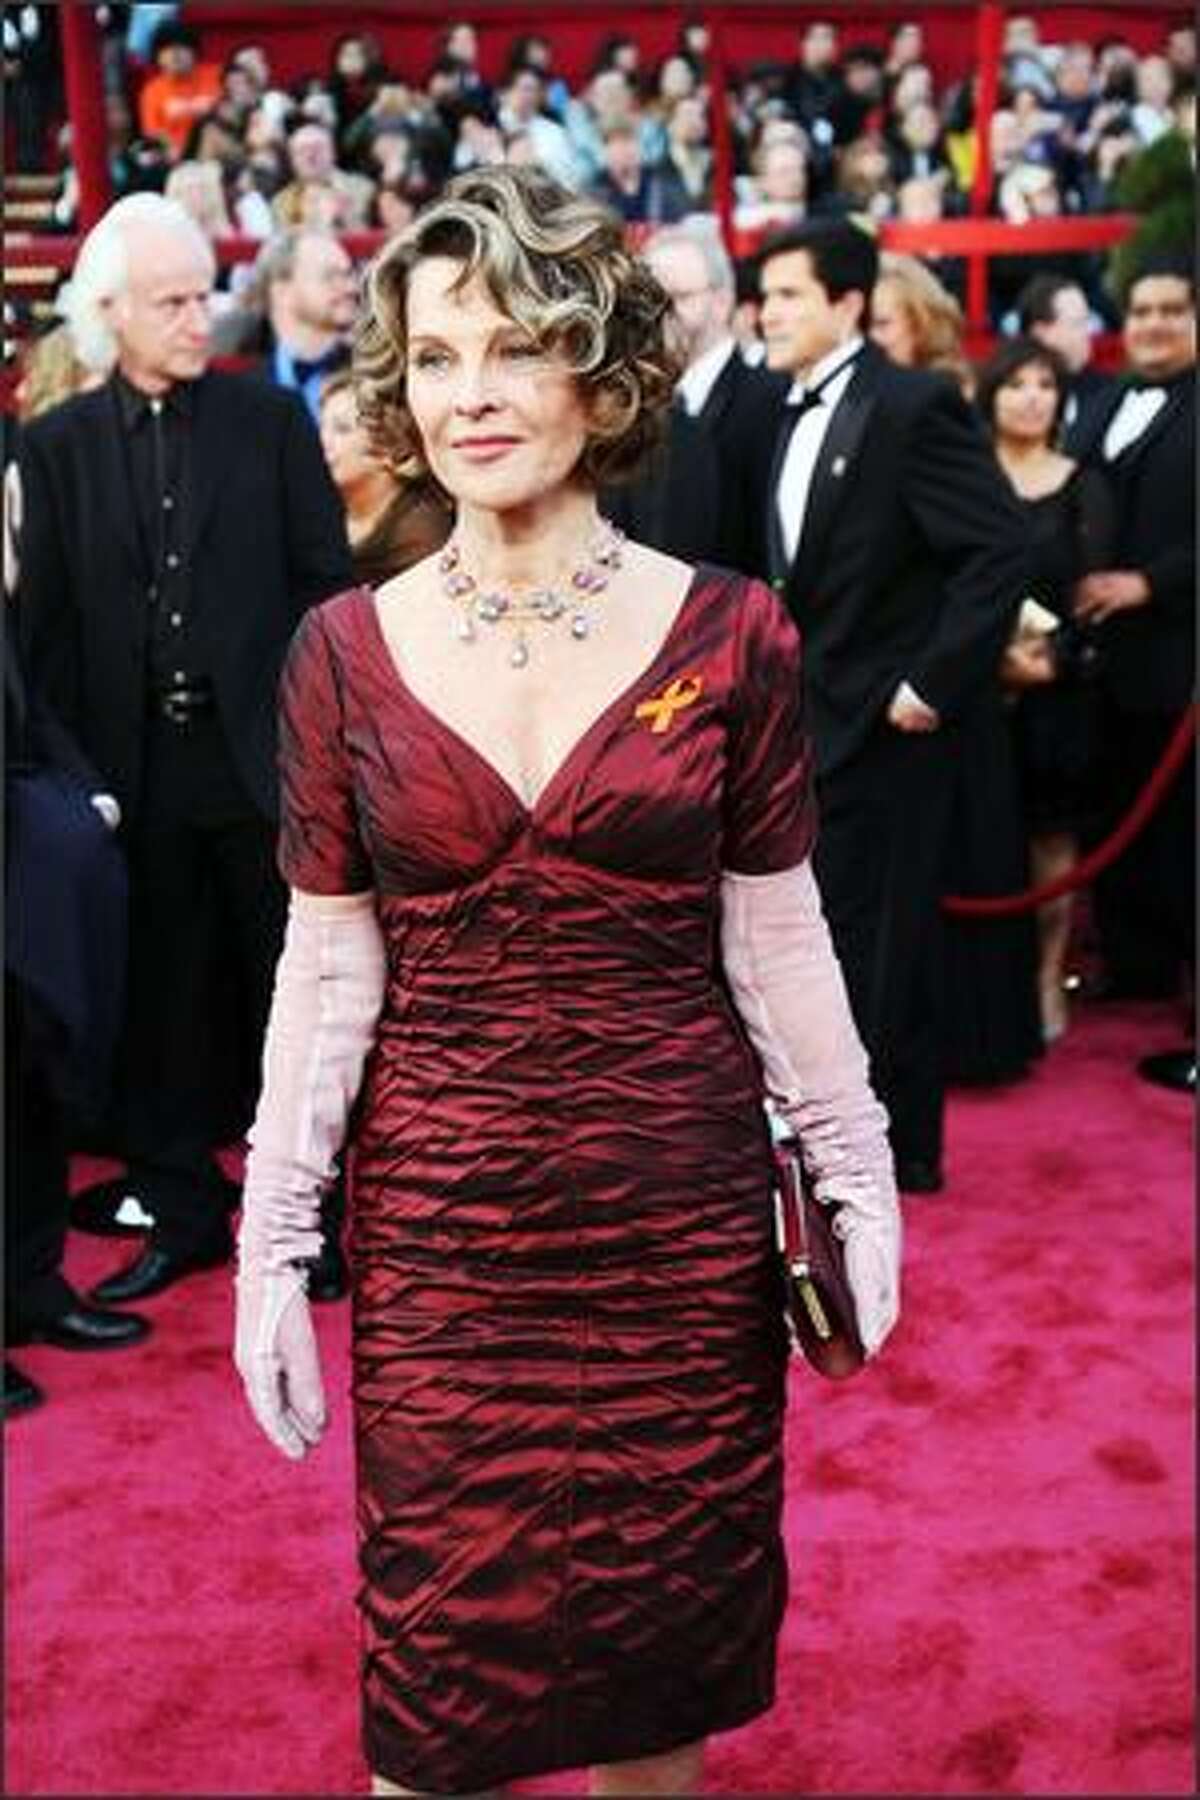 Julie Christie arrives for the 80th Annual Academy Awards at the Kodak Theater in Hollywood, California.